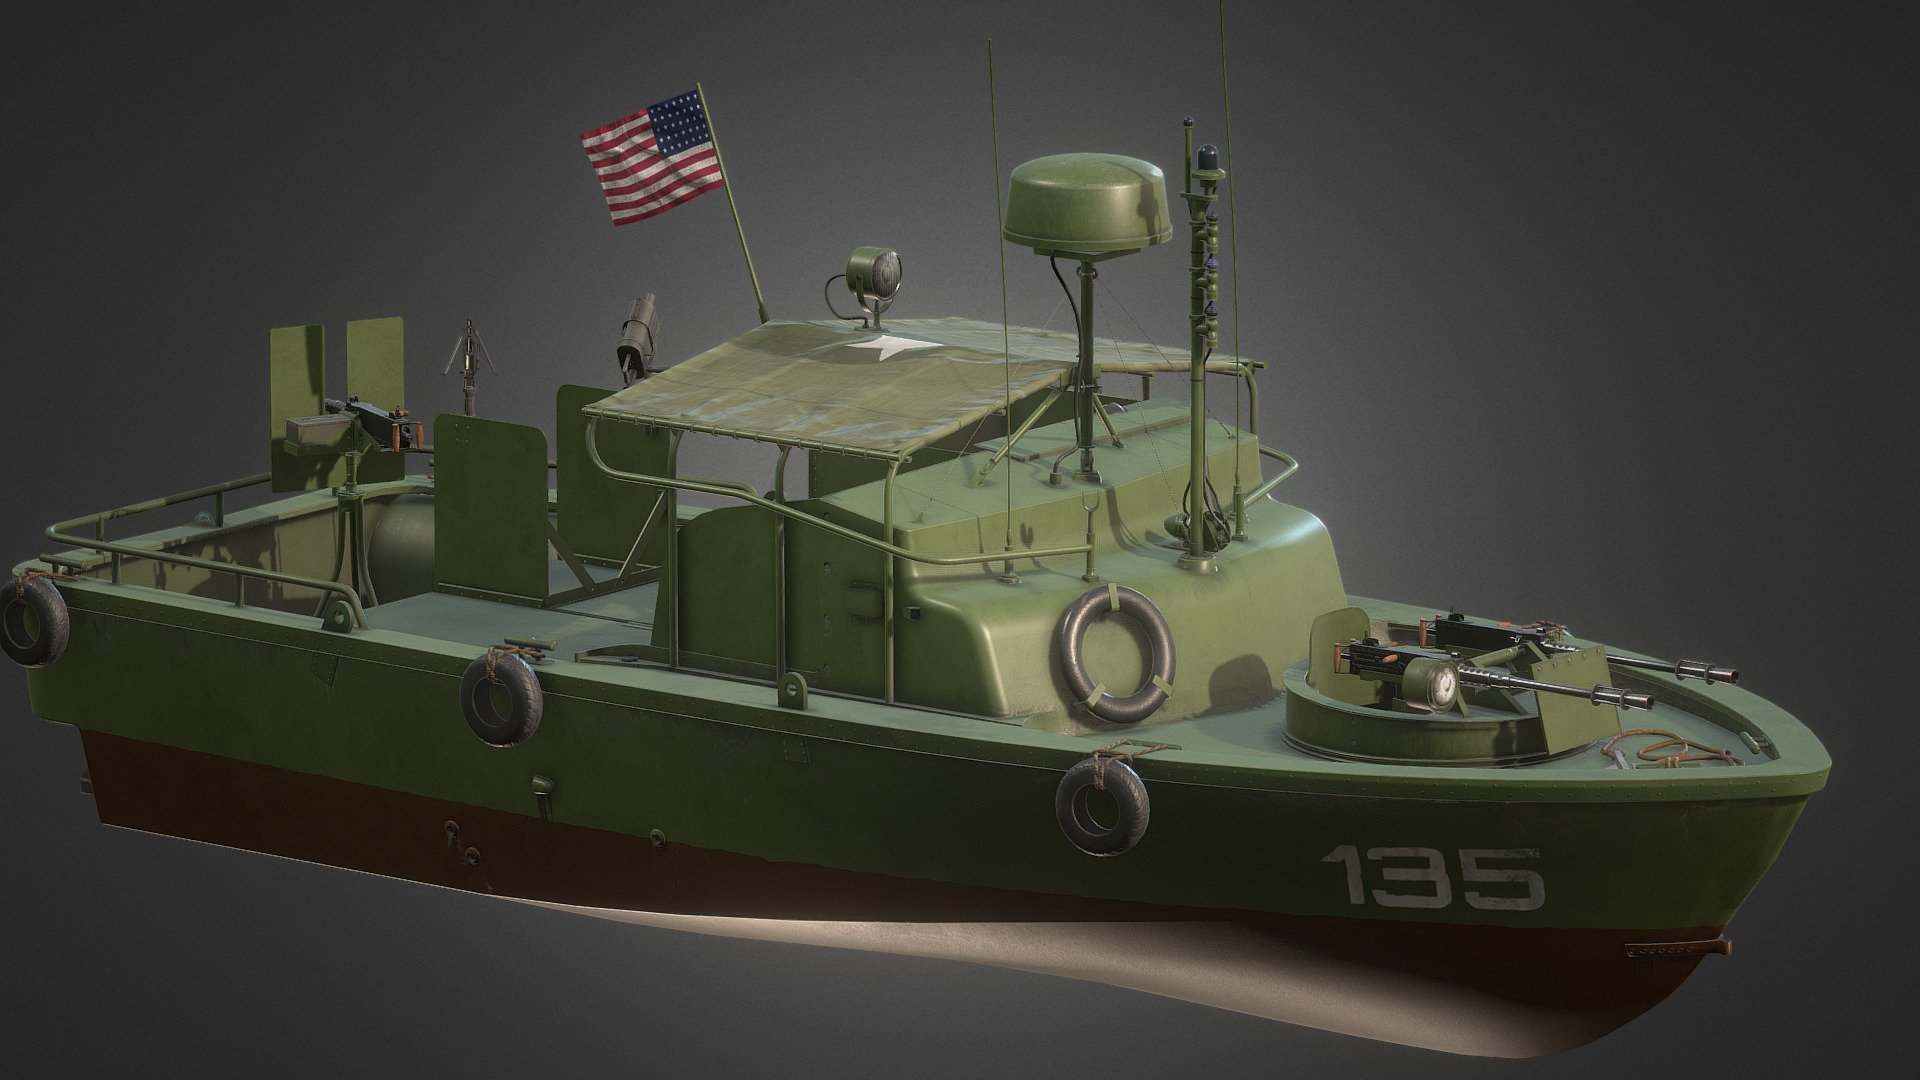 Patrol Boat River 31 Mk 2 (PBR)(Pibber)
Double M2 gun turret at the bow, one M2 gun at the stern. Additionally equipped with a M60 machine gun and a Mk18 grenade launcher.
Powered by two waterjets 3d model